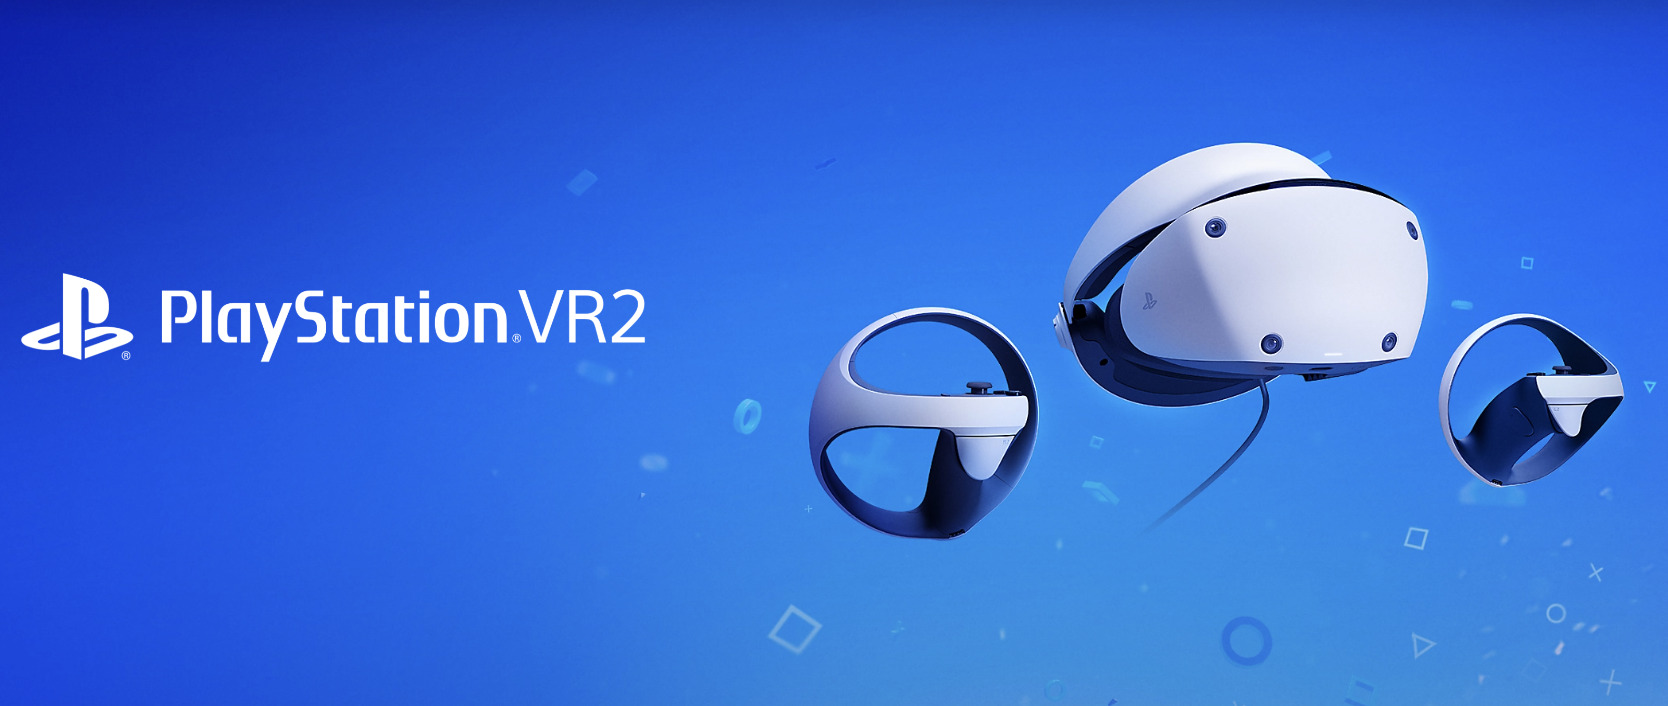 PS VR2】『プレイステーション VR2 “Horizon Call of the Mountain” 同